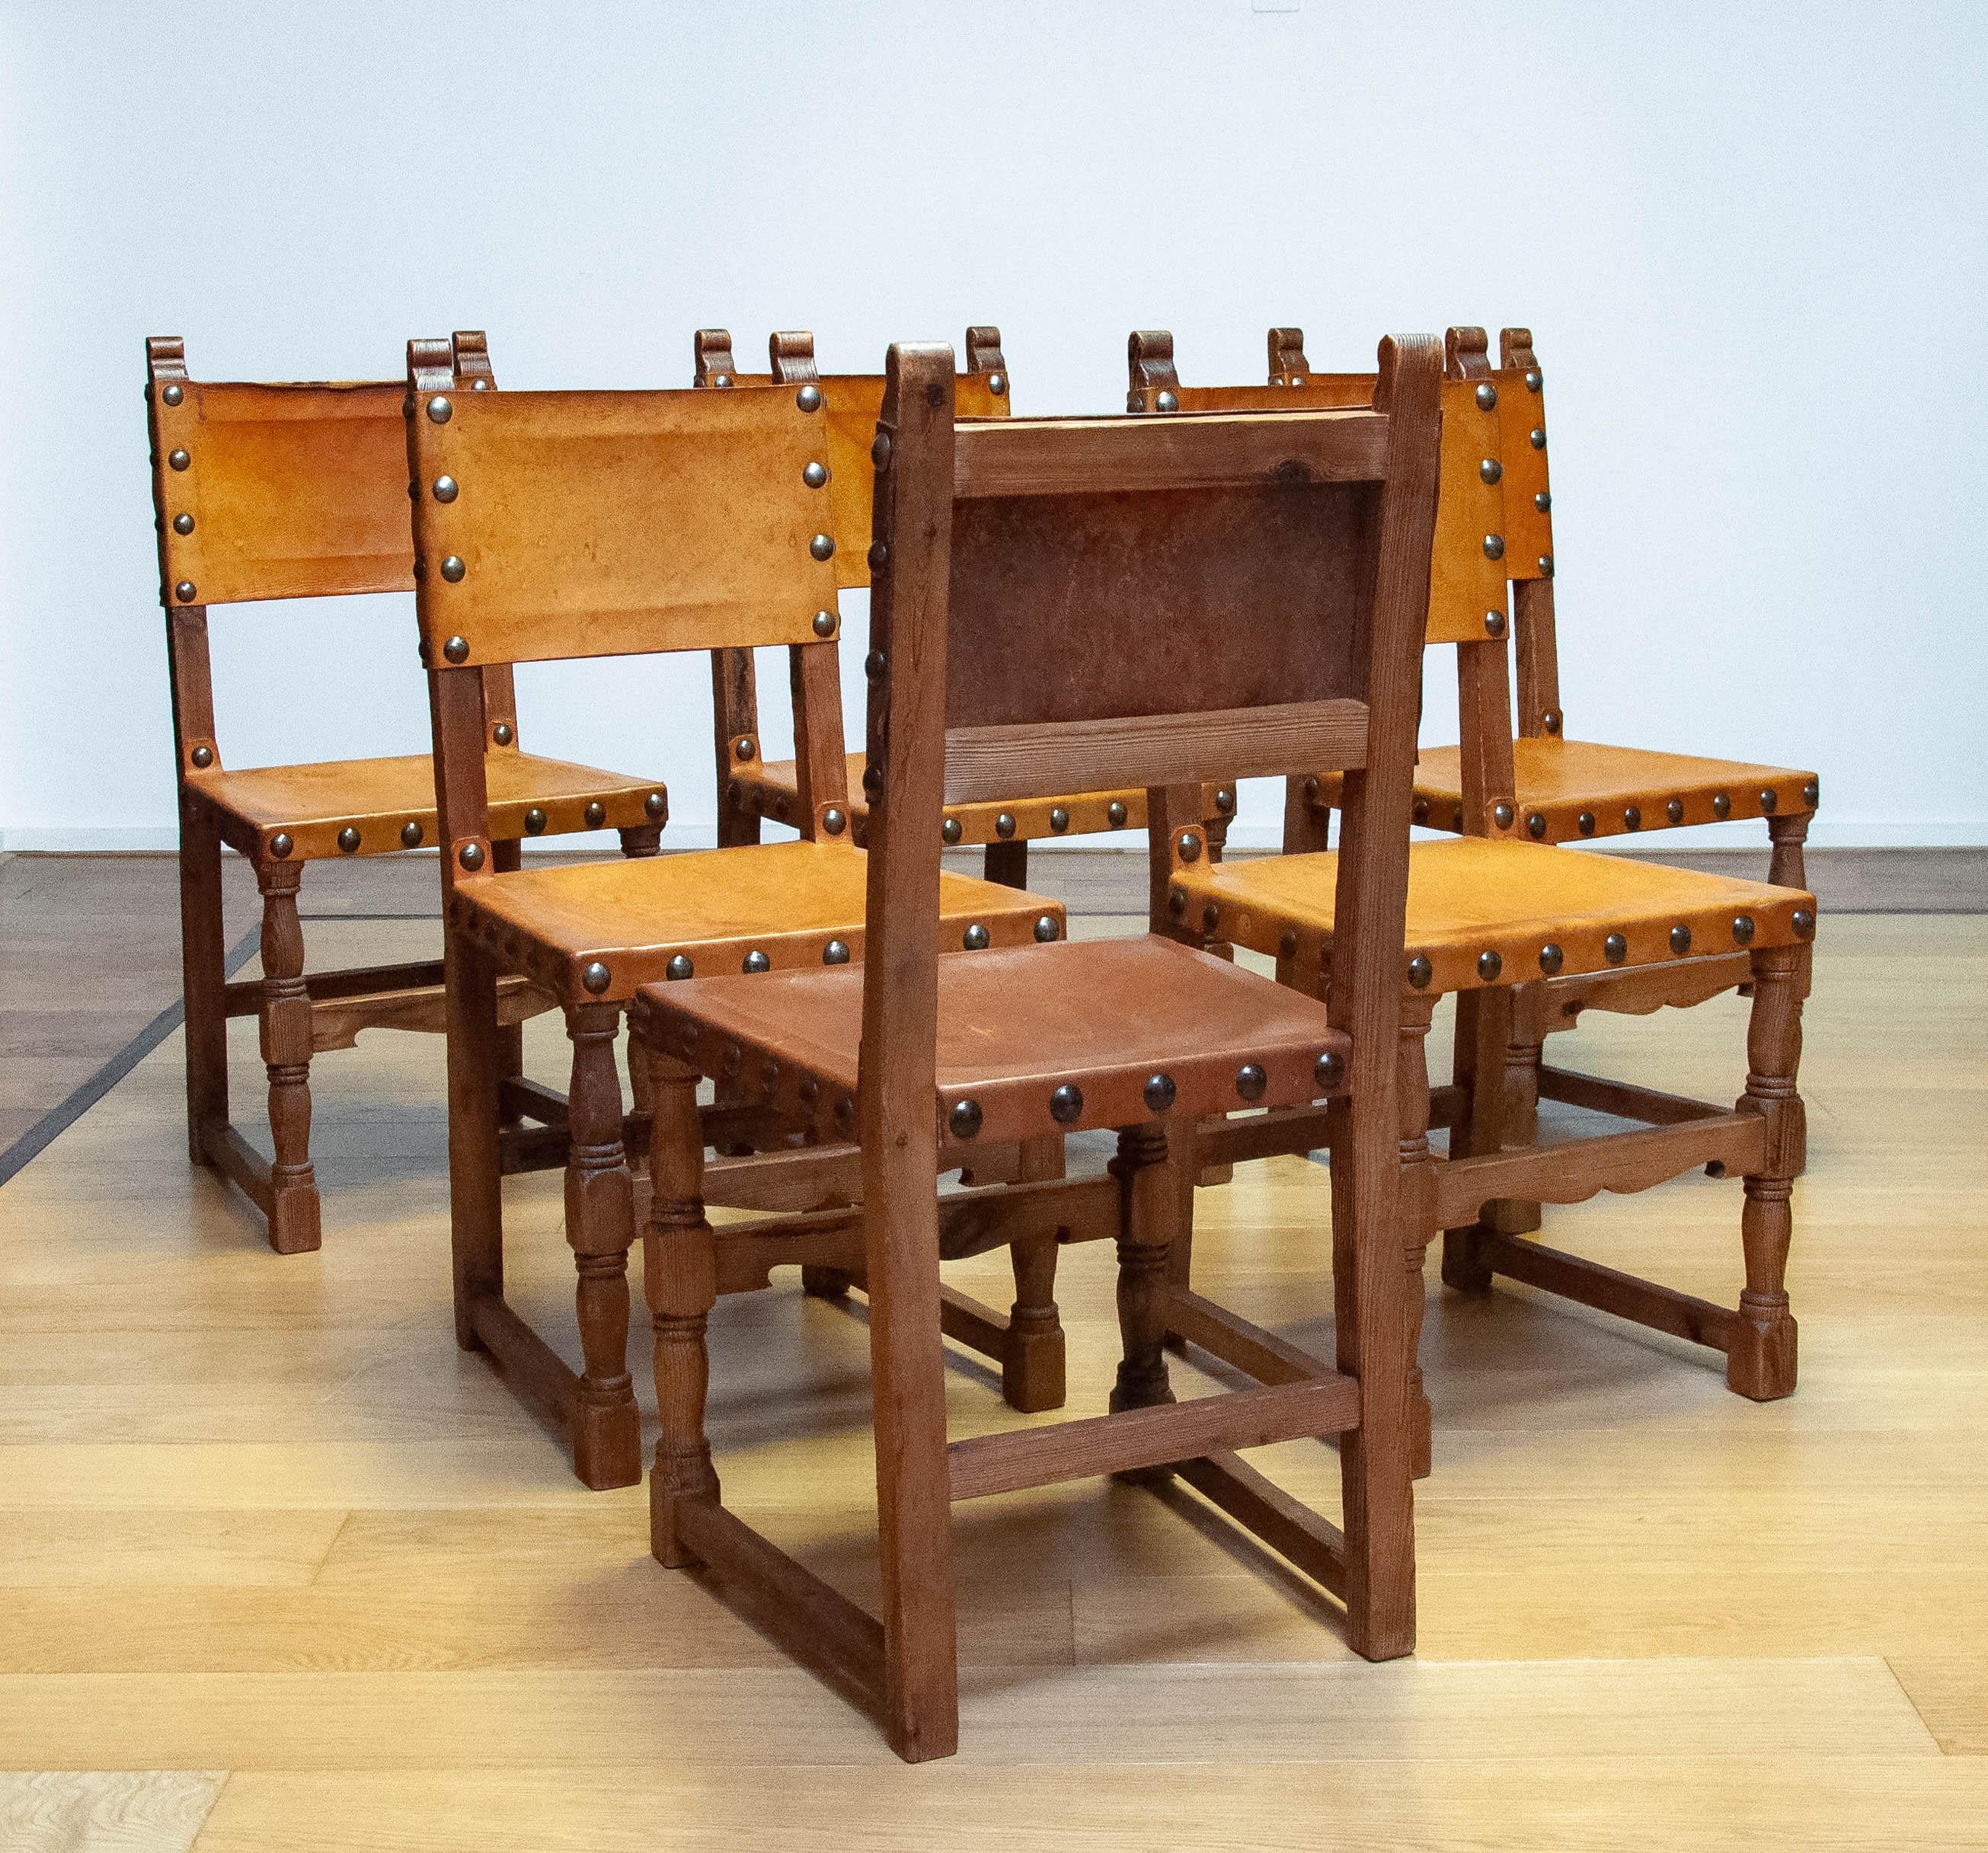 6 Antique Swedish Folk Art Farm County Dining Chairs In Pine And Tan Leather For Sale 2